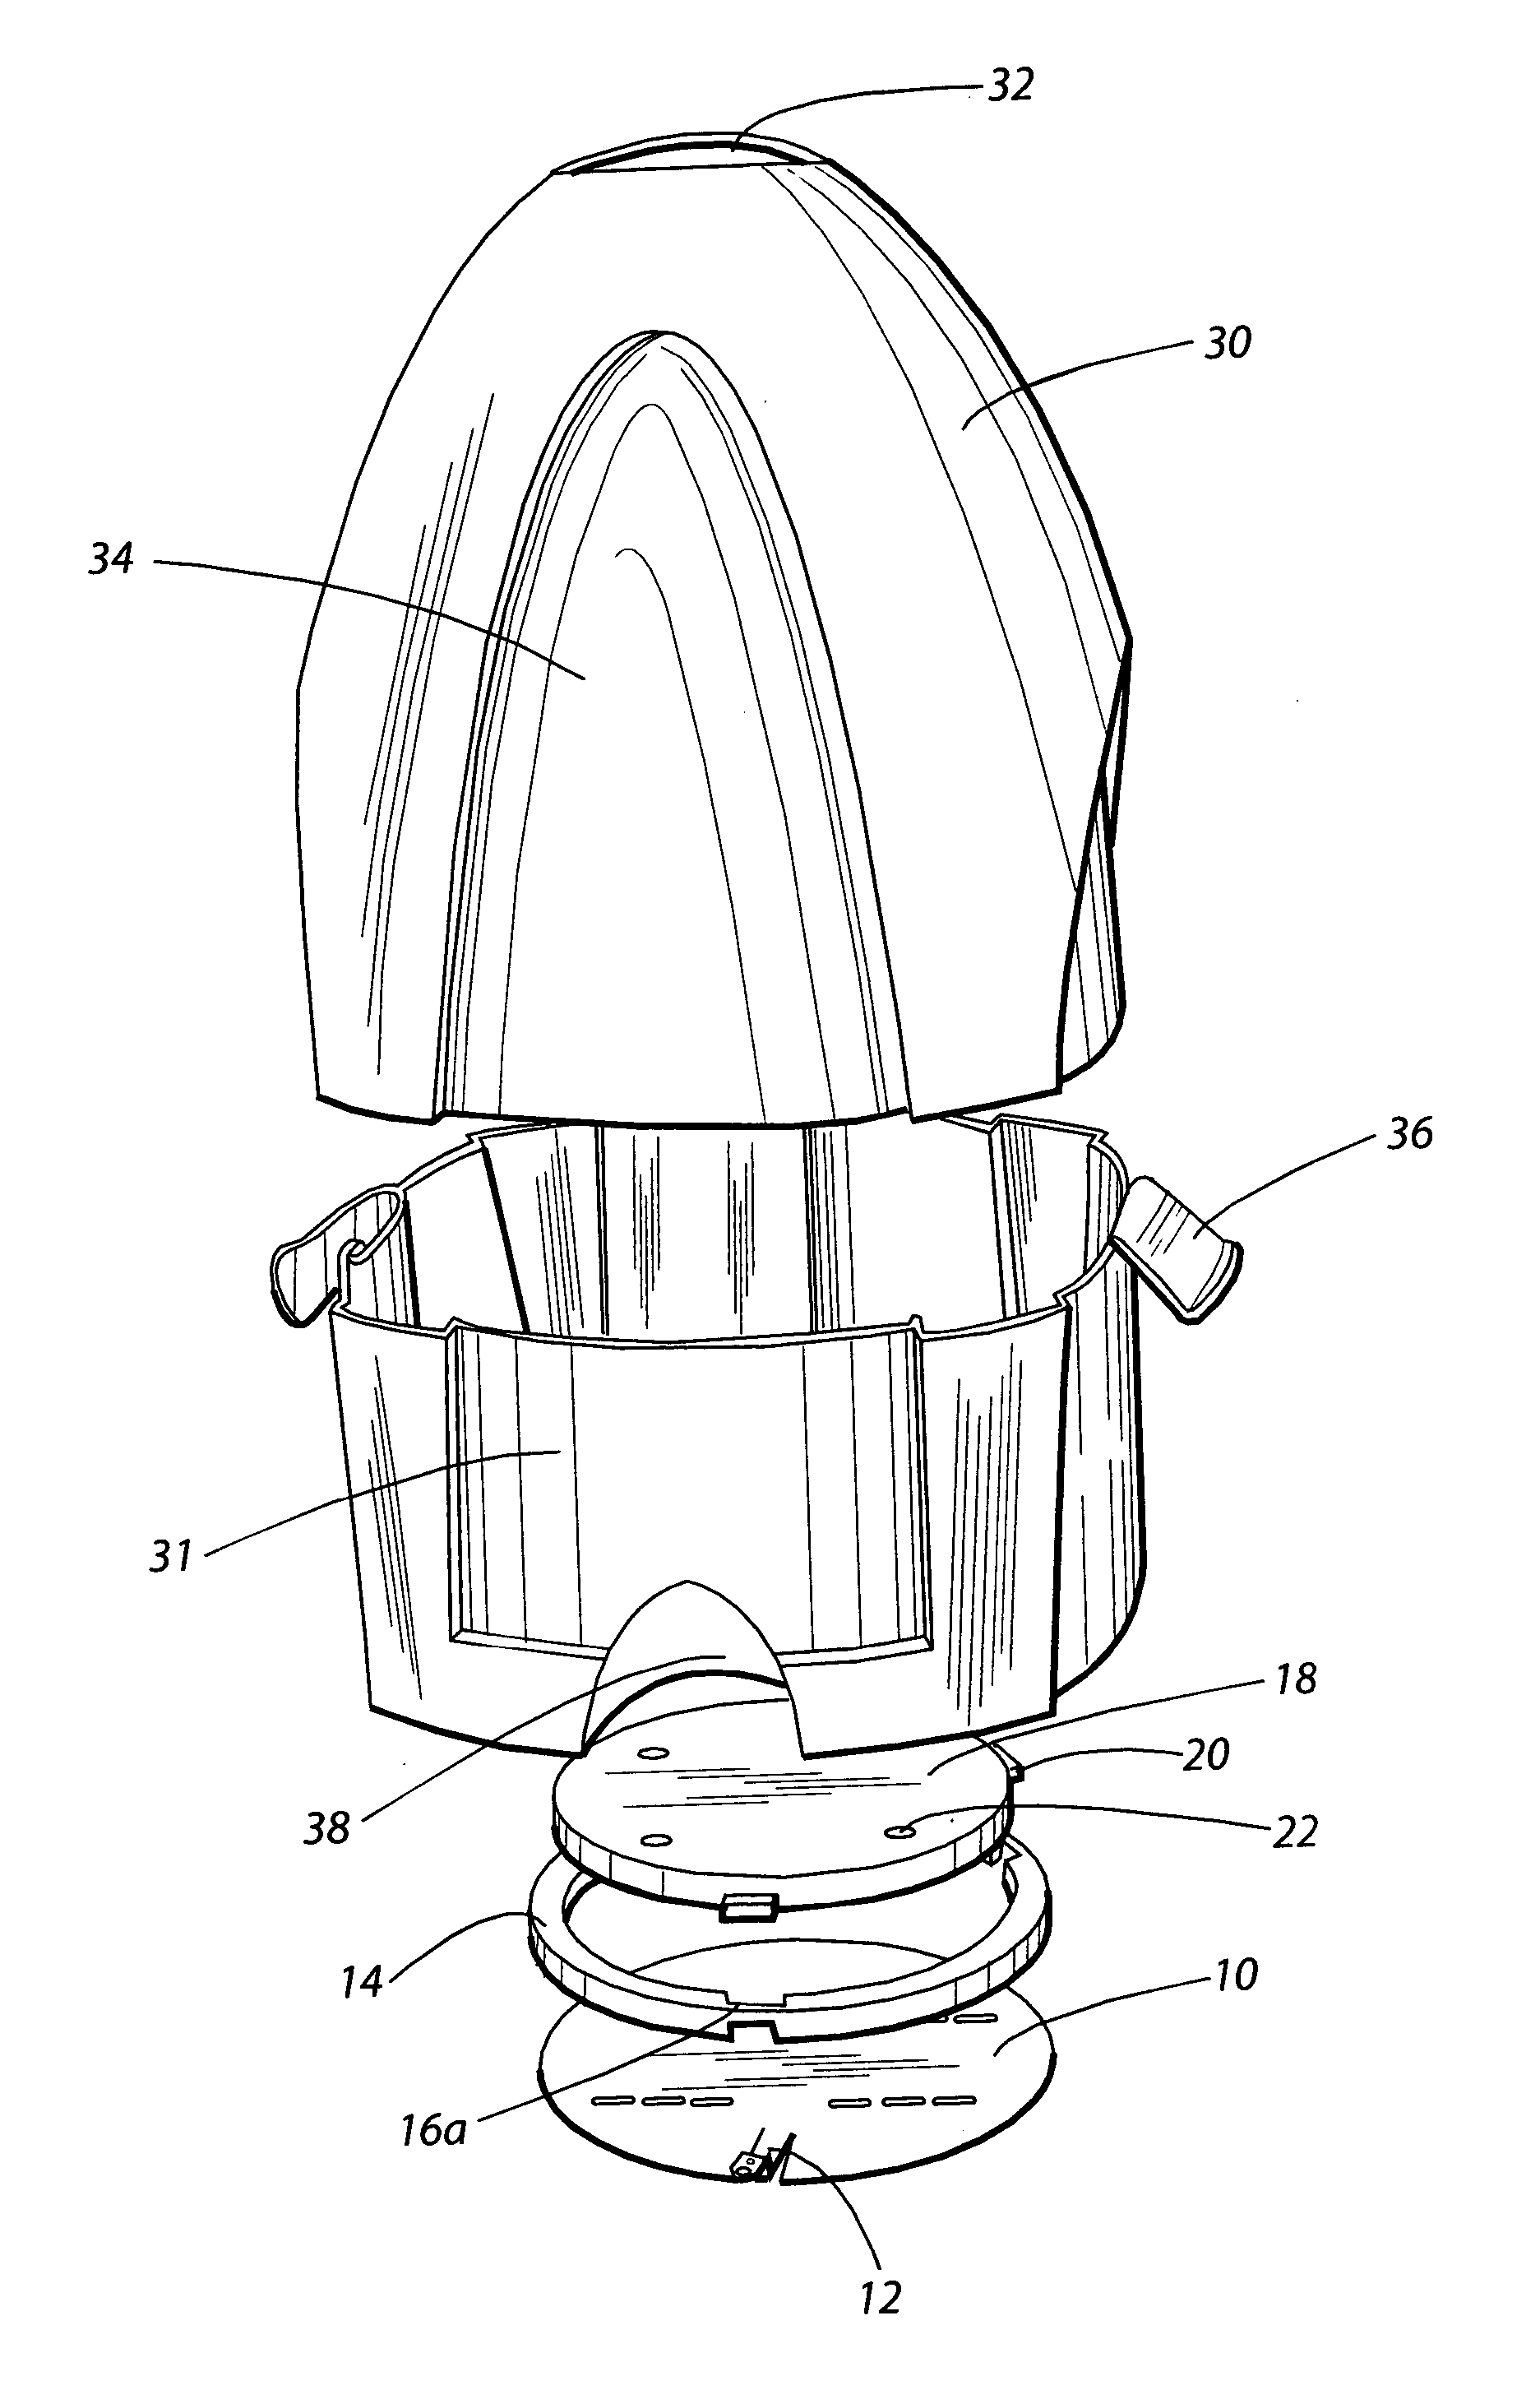 Universally mounted multi-purpose carrying case